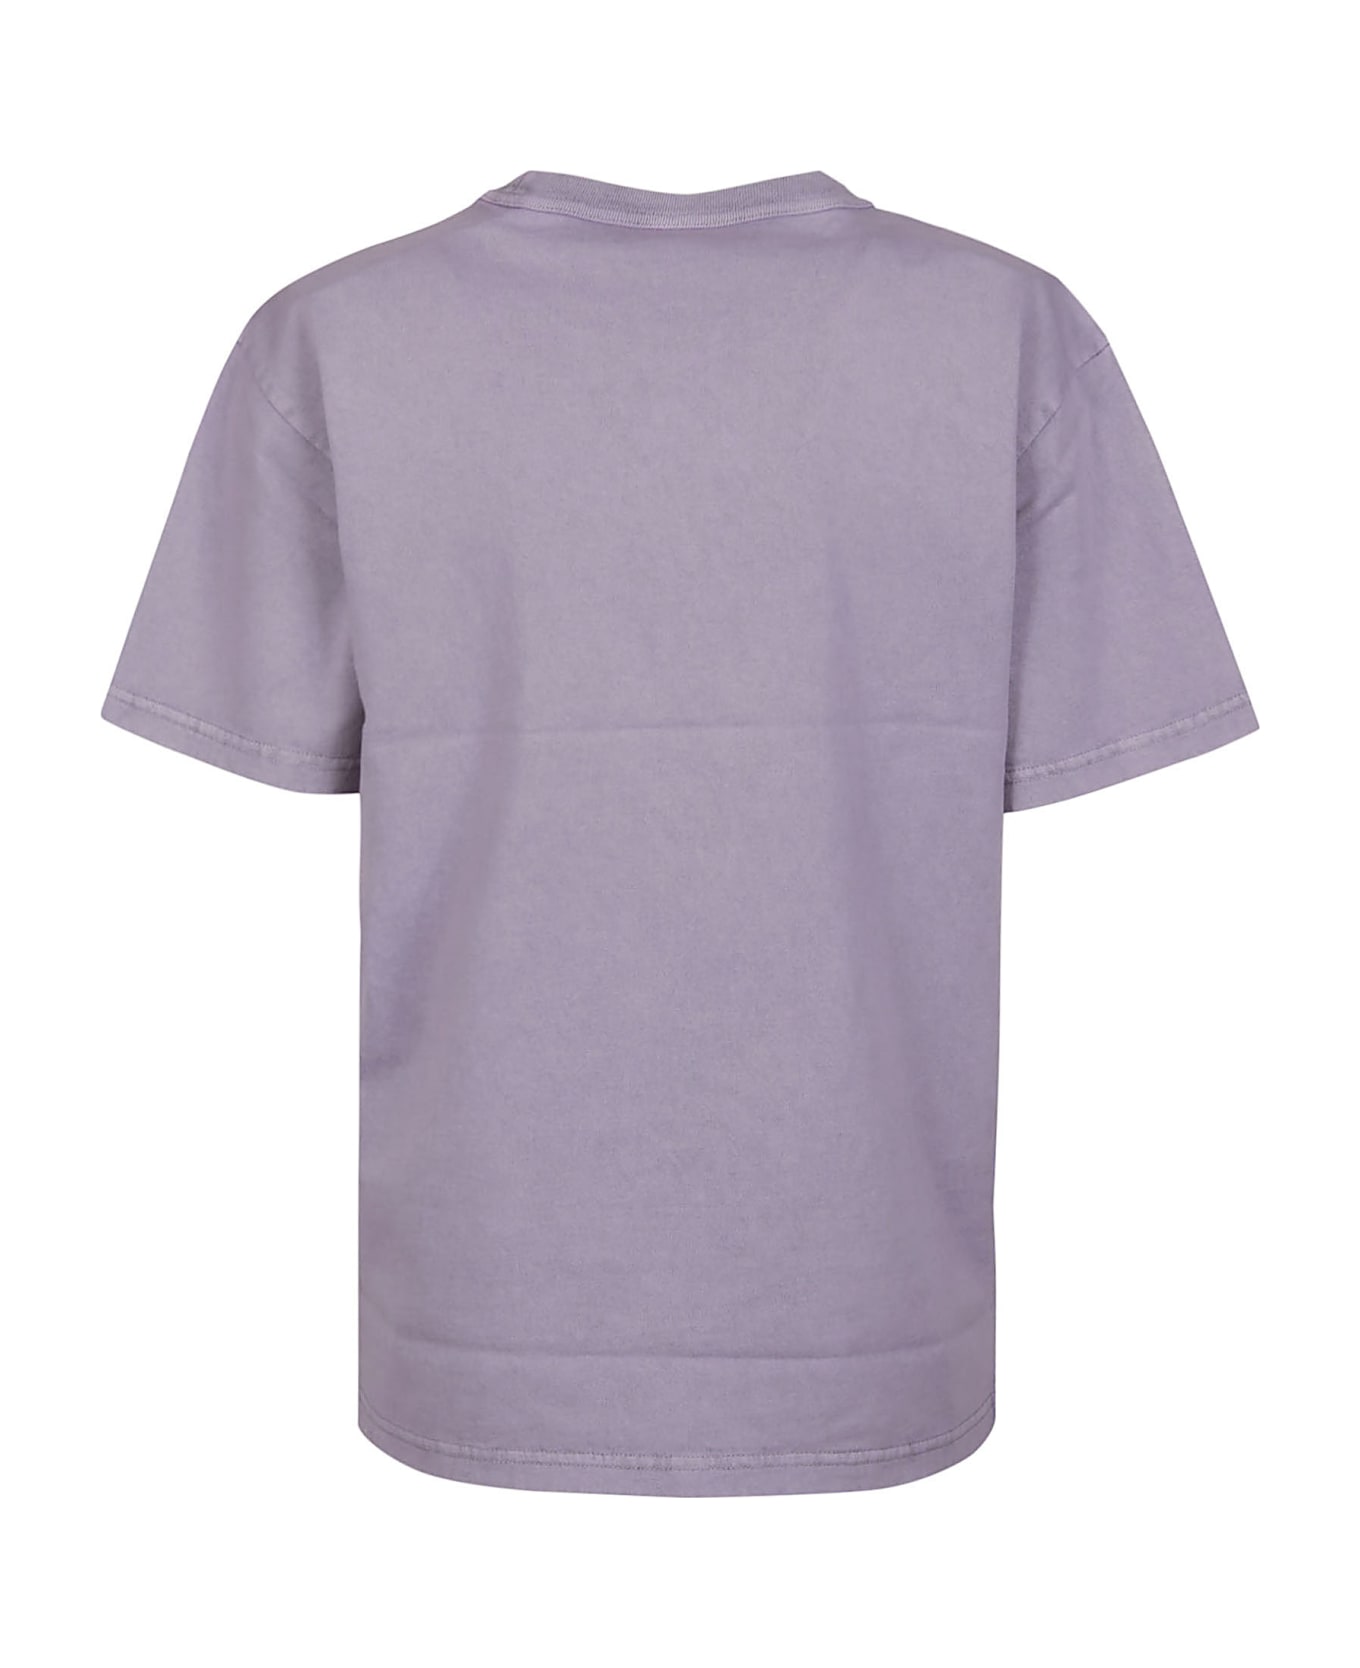 T by Alexander Wang Puff Logo Bound Neck Essential T-shirt - A Acid Pink Lavender